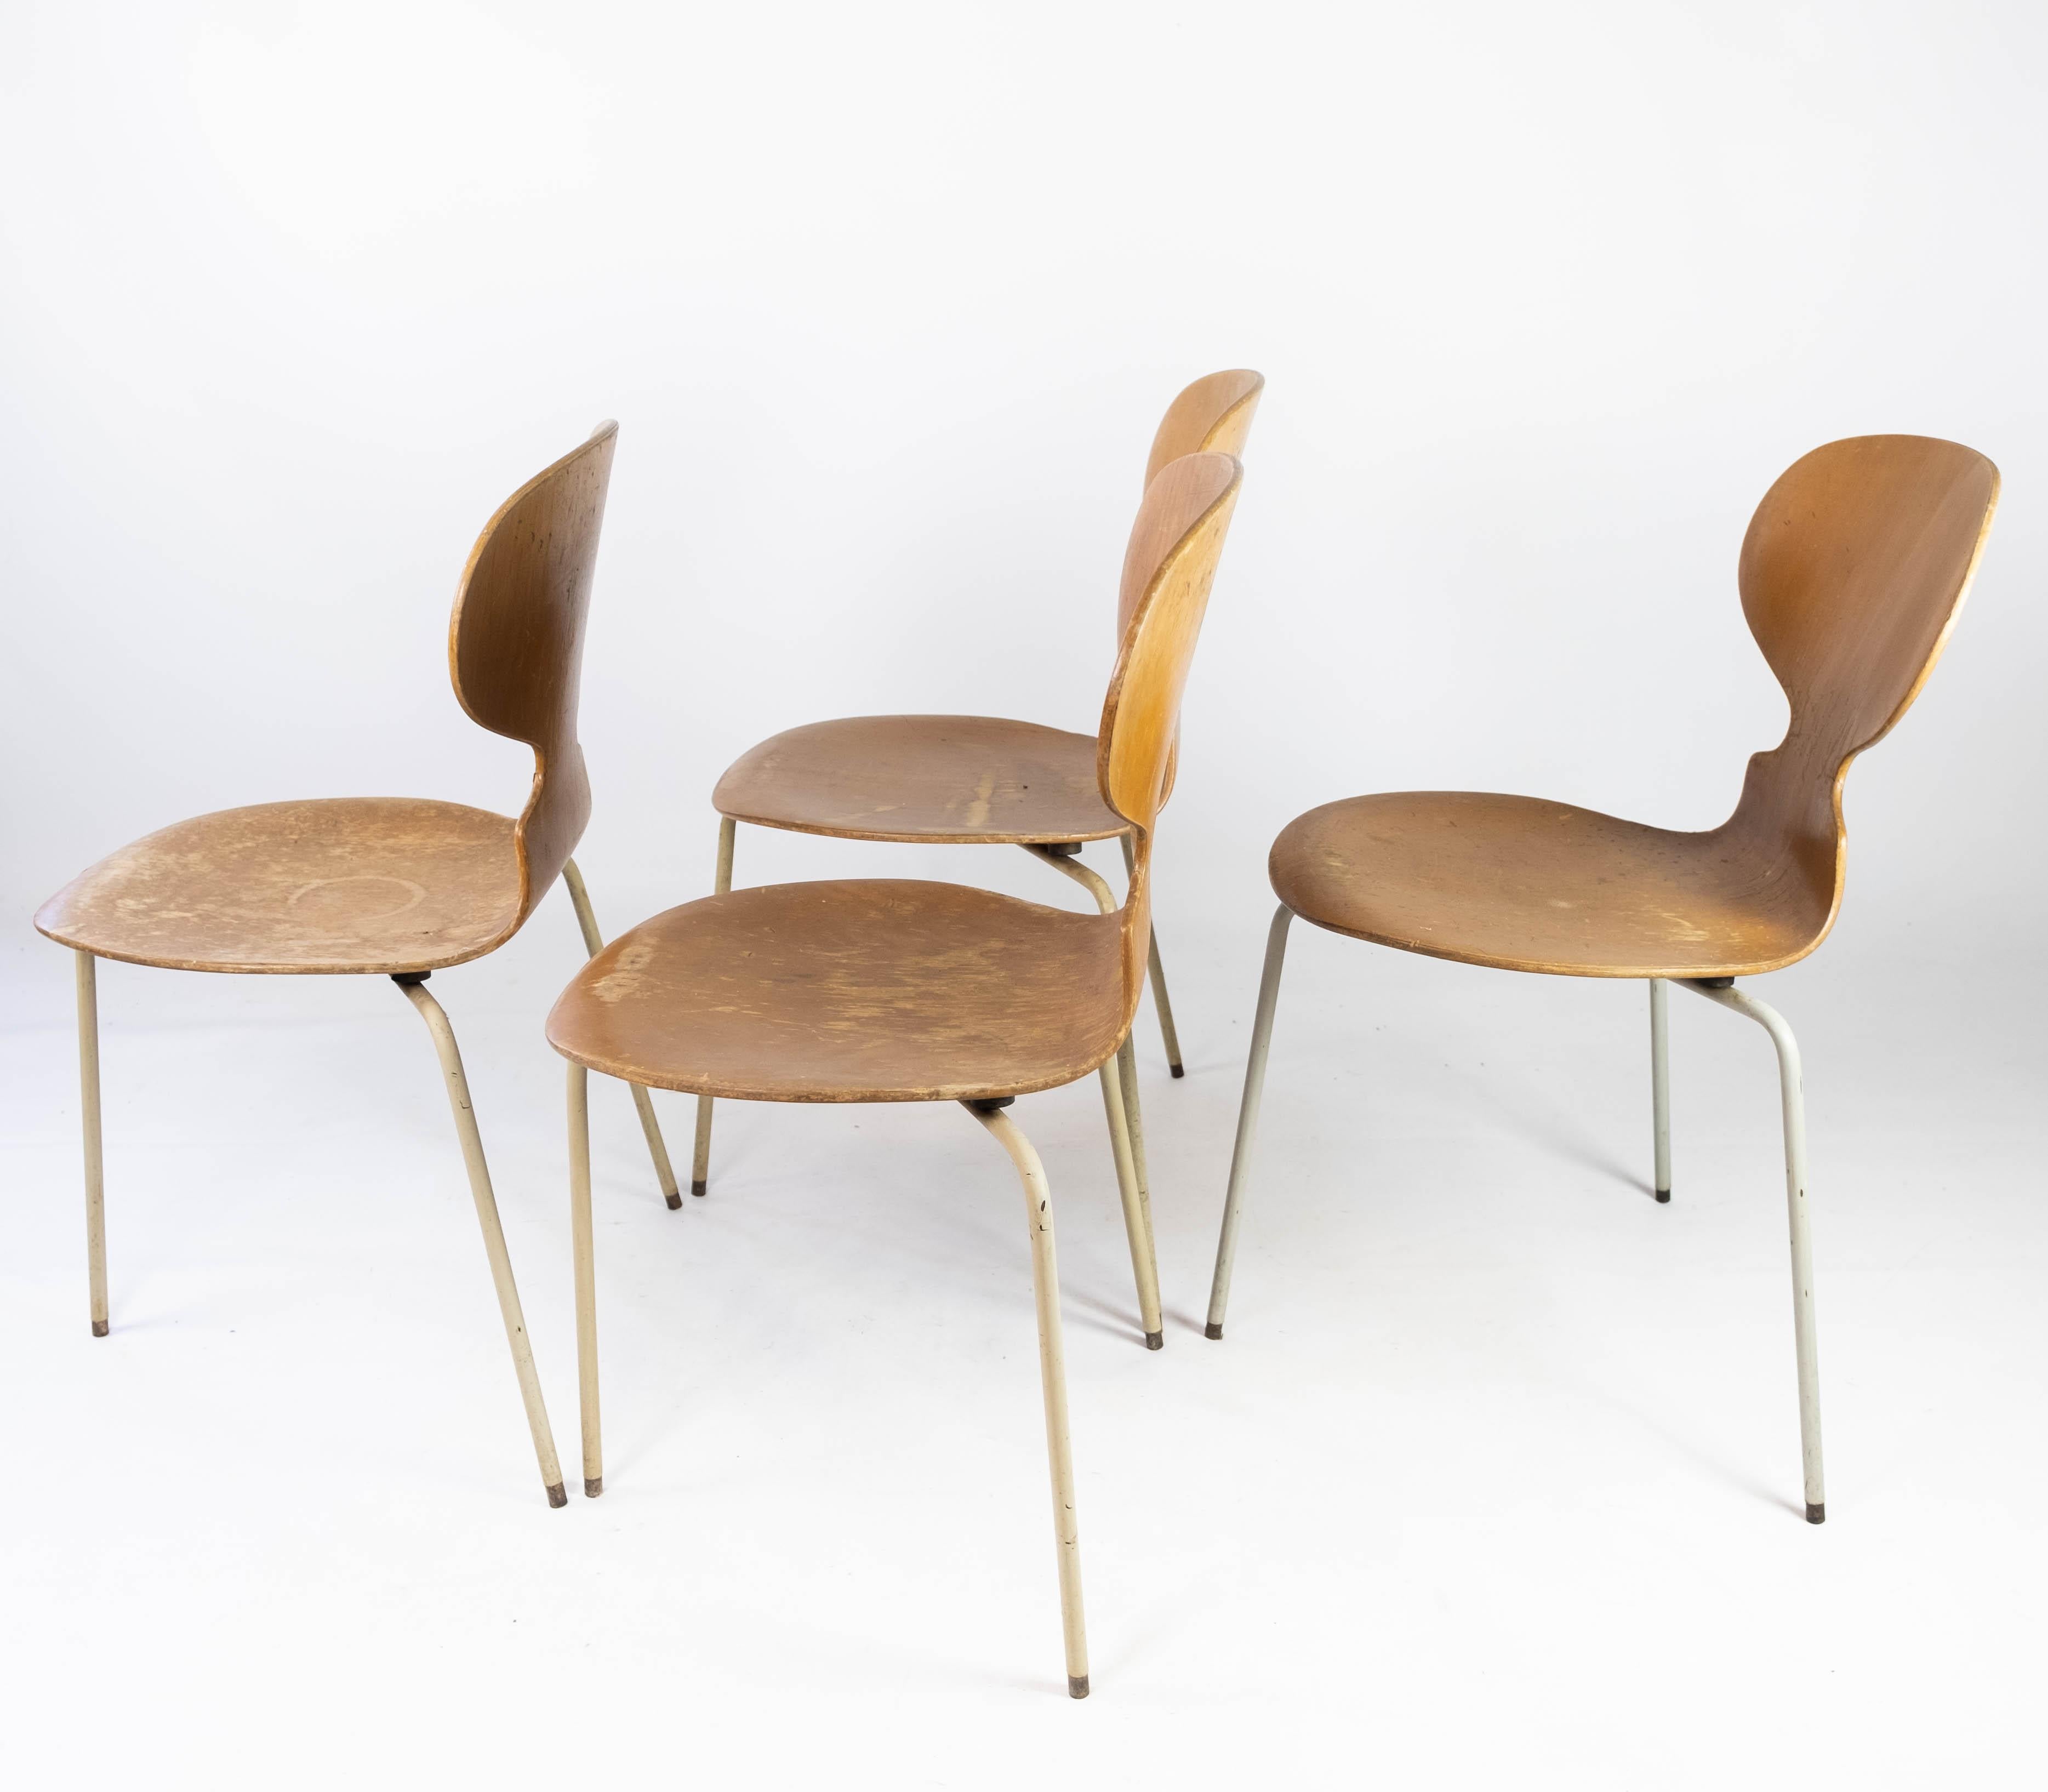 Set of Four Ant Chairs, Model 3101, in Light Wood, by Arne Jacobsen, 1950s For Sale 2